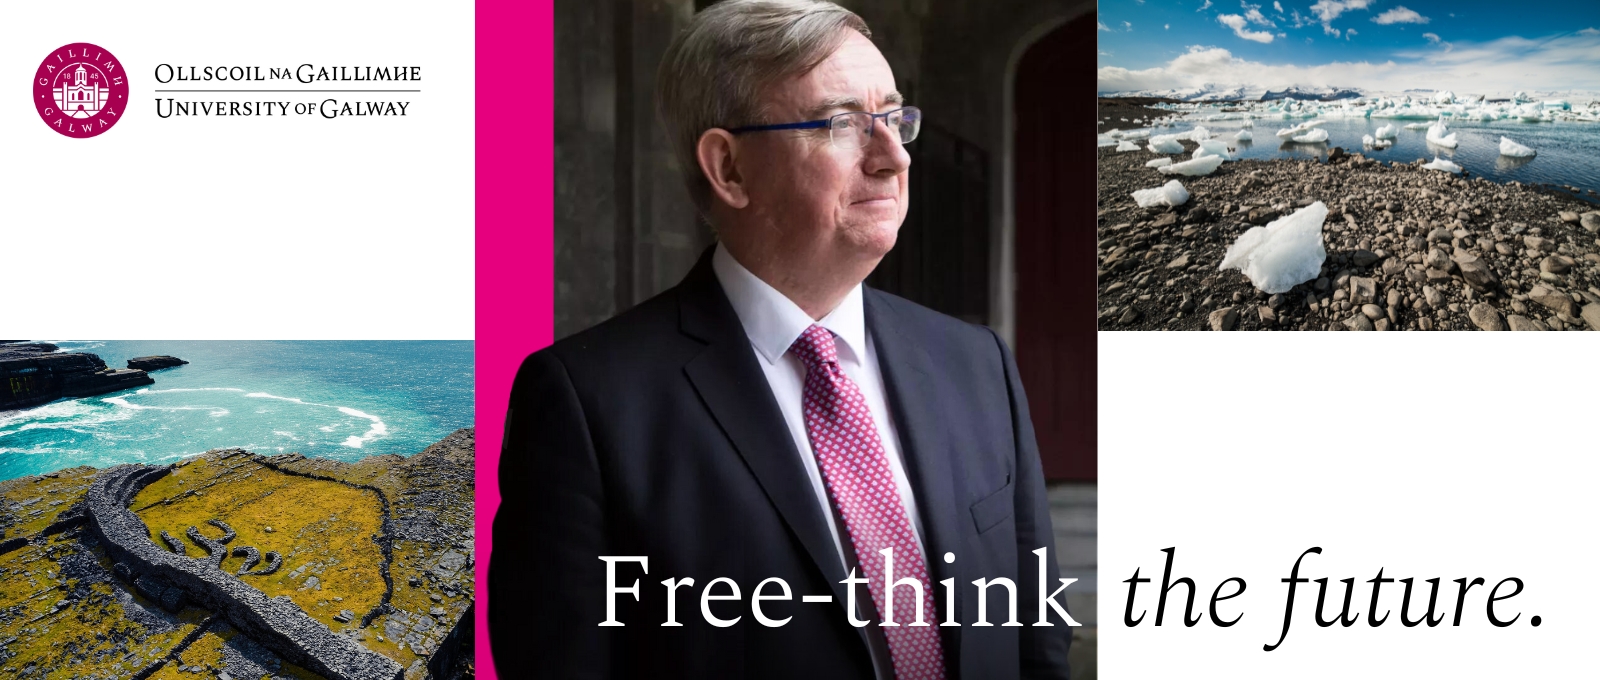 Hero image promoting the variety of content produced in the content unit, featuring images of ice caps, ancient forts and the president of University of Galway.